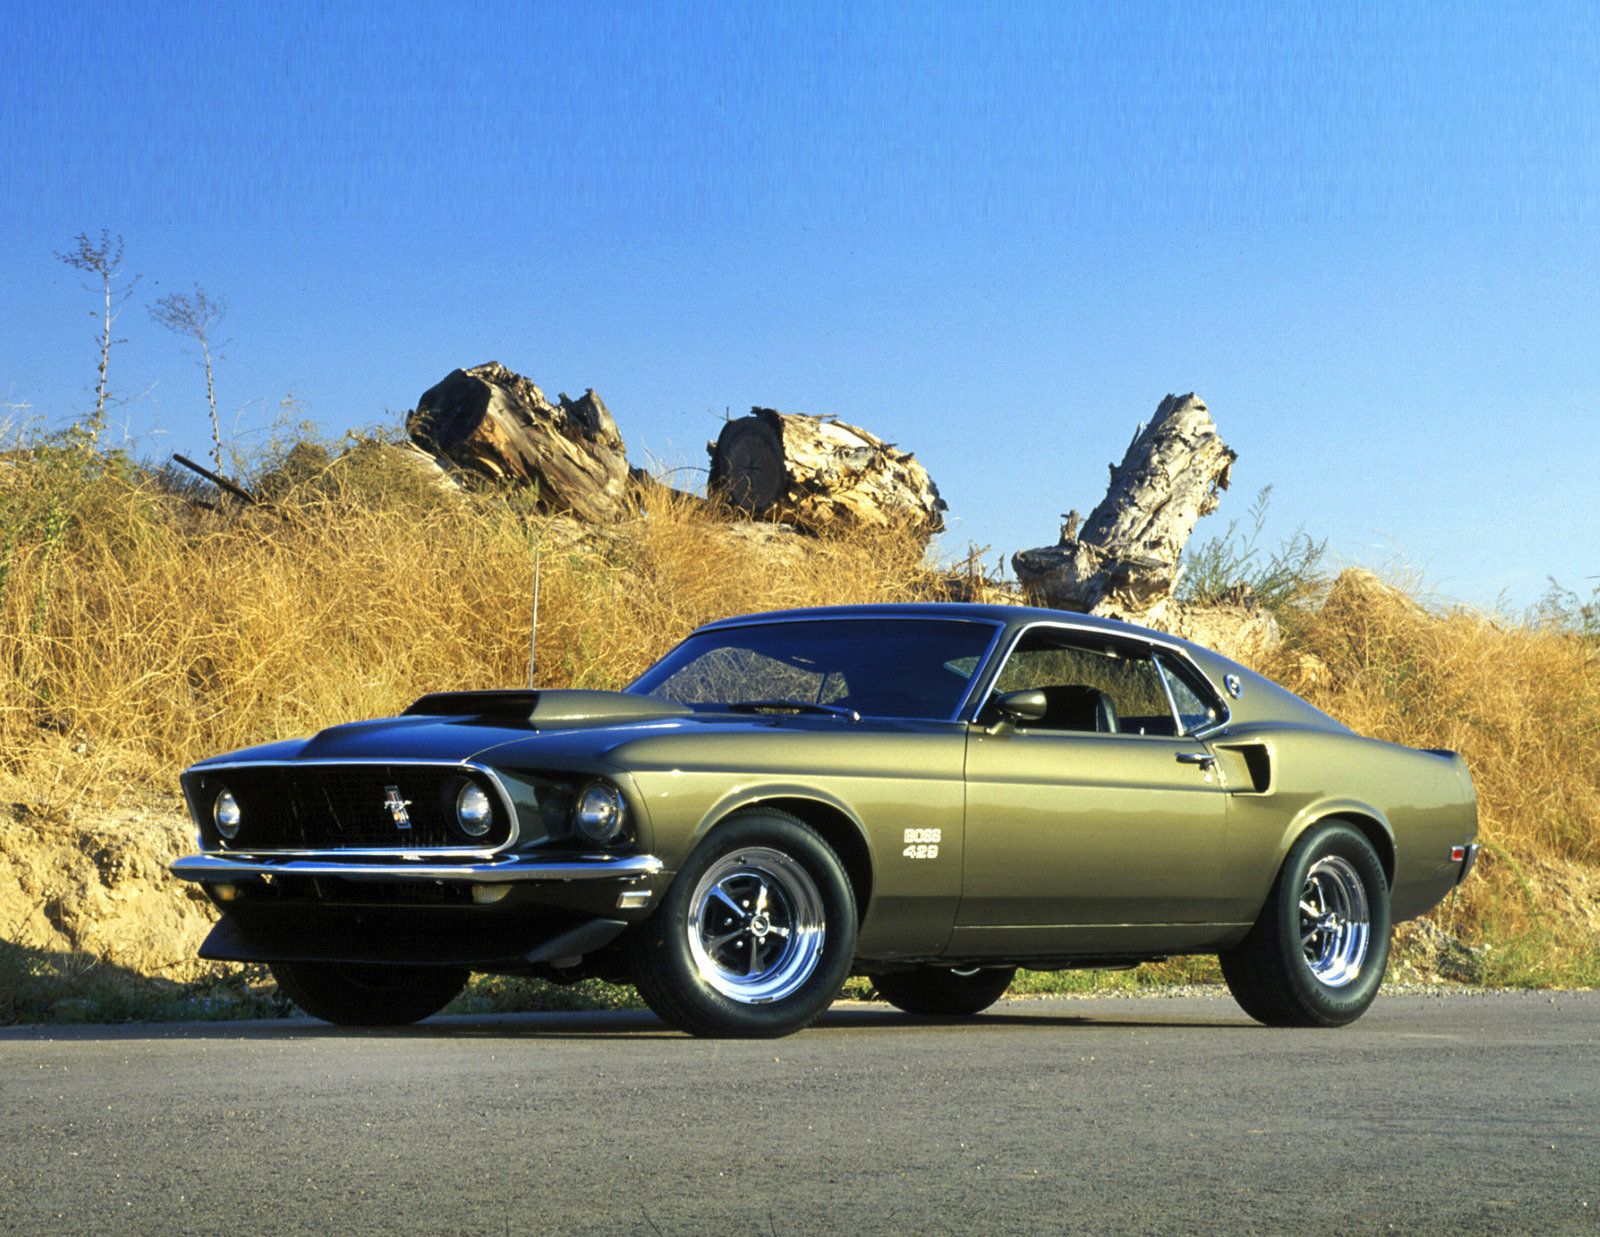 Ford Mustang Boss wallpaper, Vehicles, HQ 1969 Ford Mustang